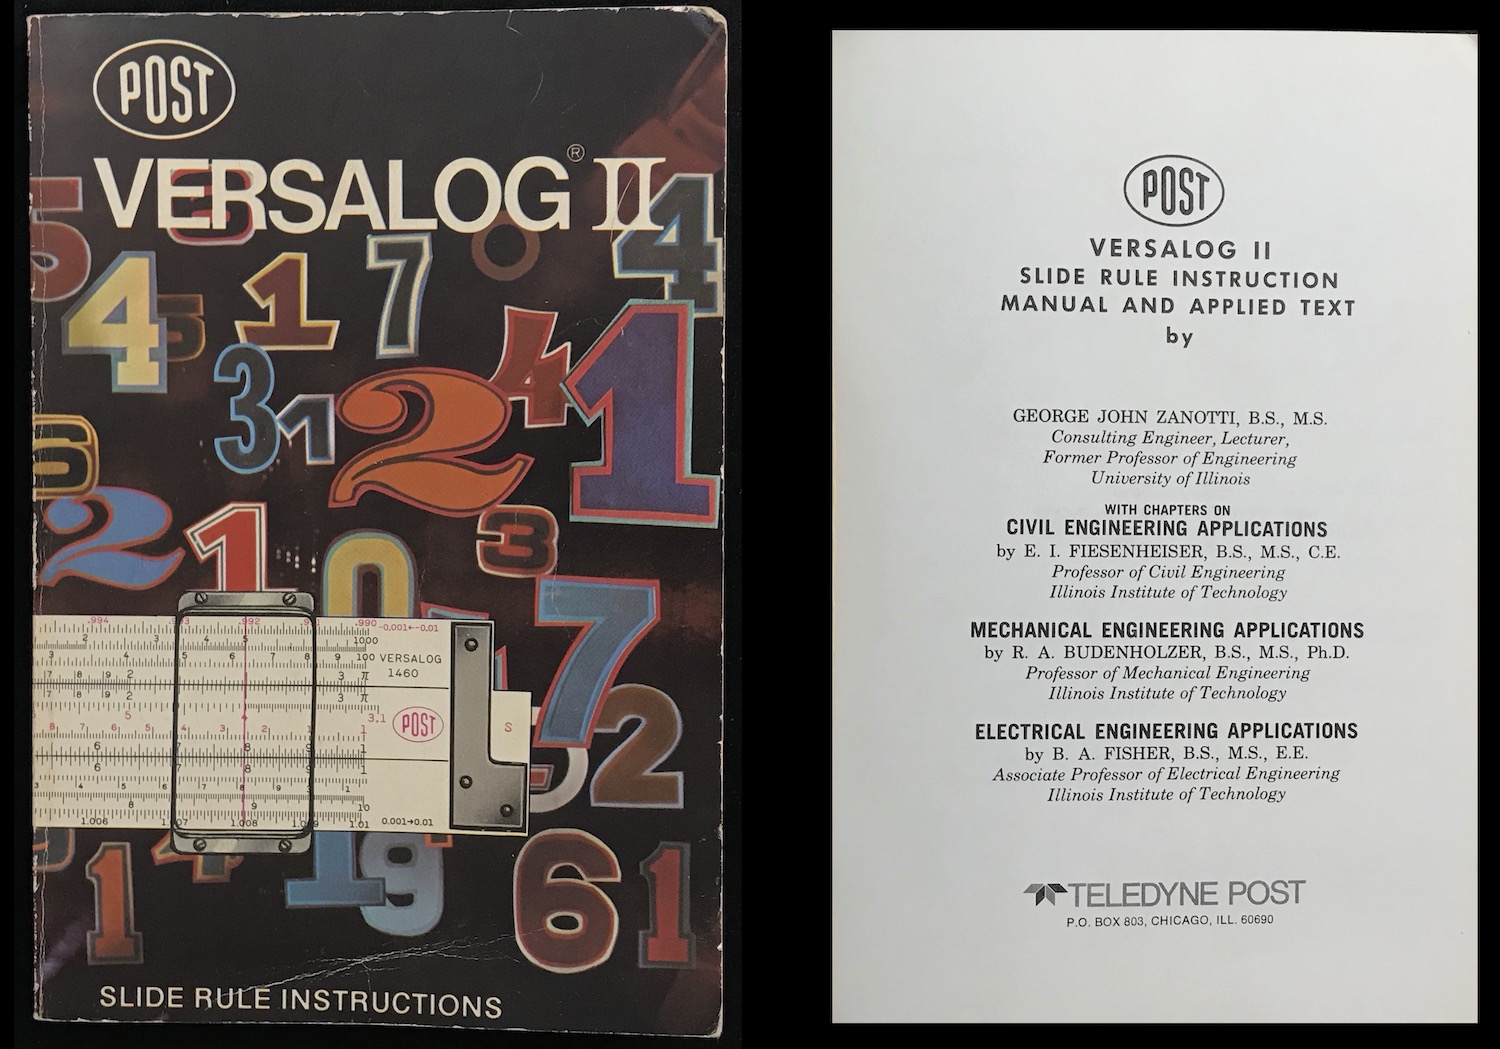 Versalog II Slide Rule Instruction Manual and Applied Text, 1970.